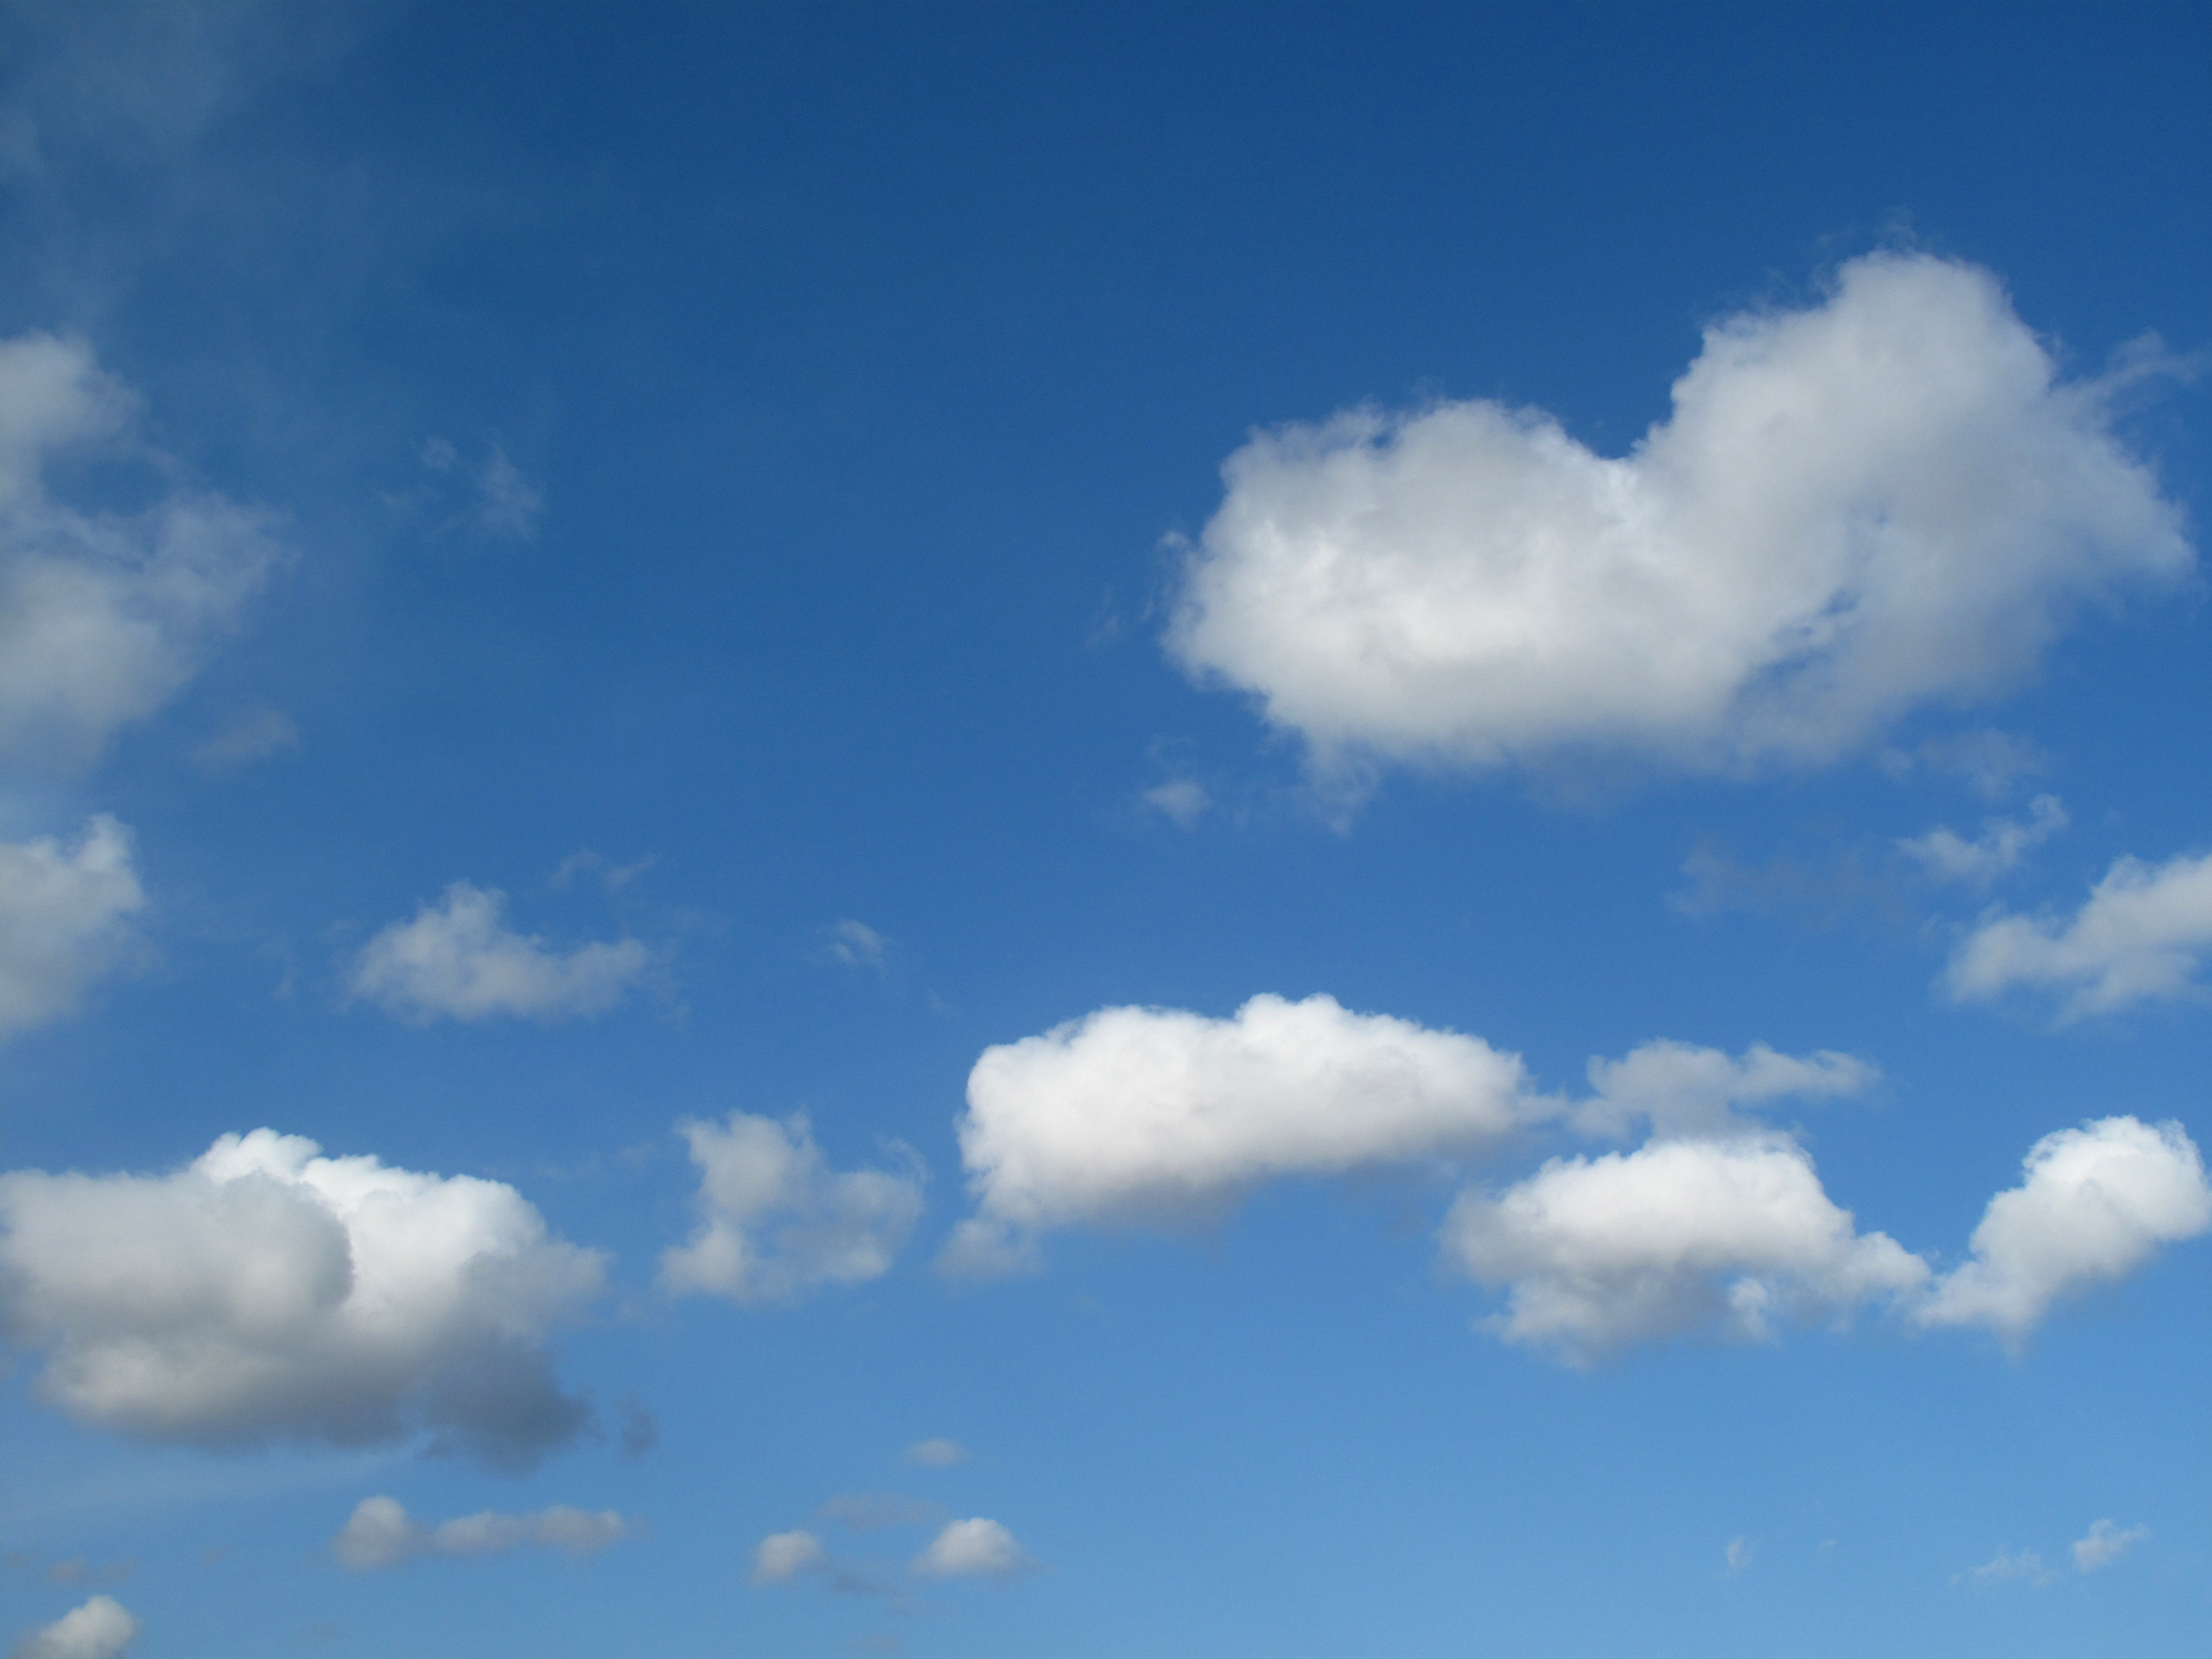 Cloudy Day Free Stock Photo Image Picture Cloudy Blue Sky Royalty Free Sky Clouds Stock Photography